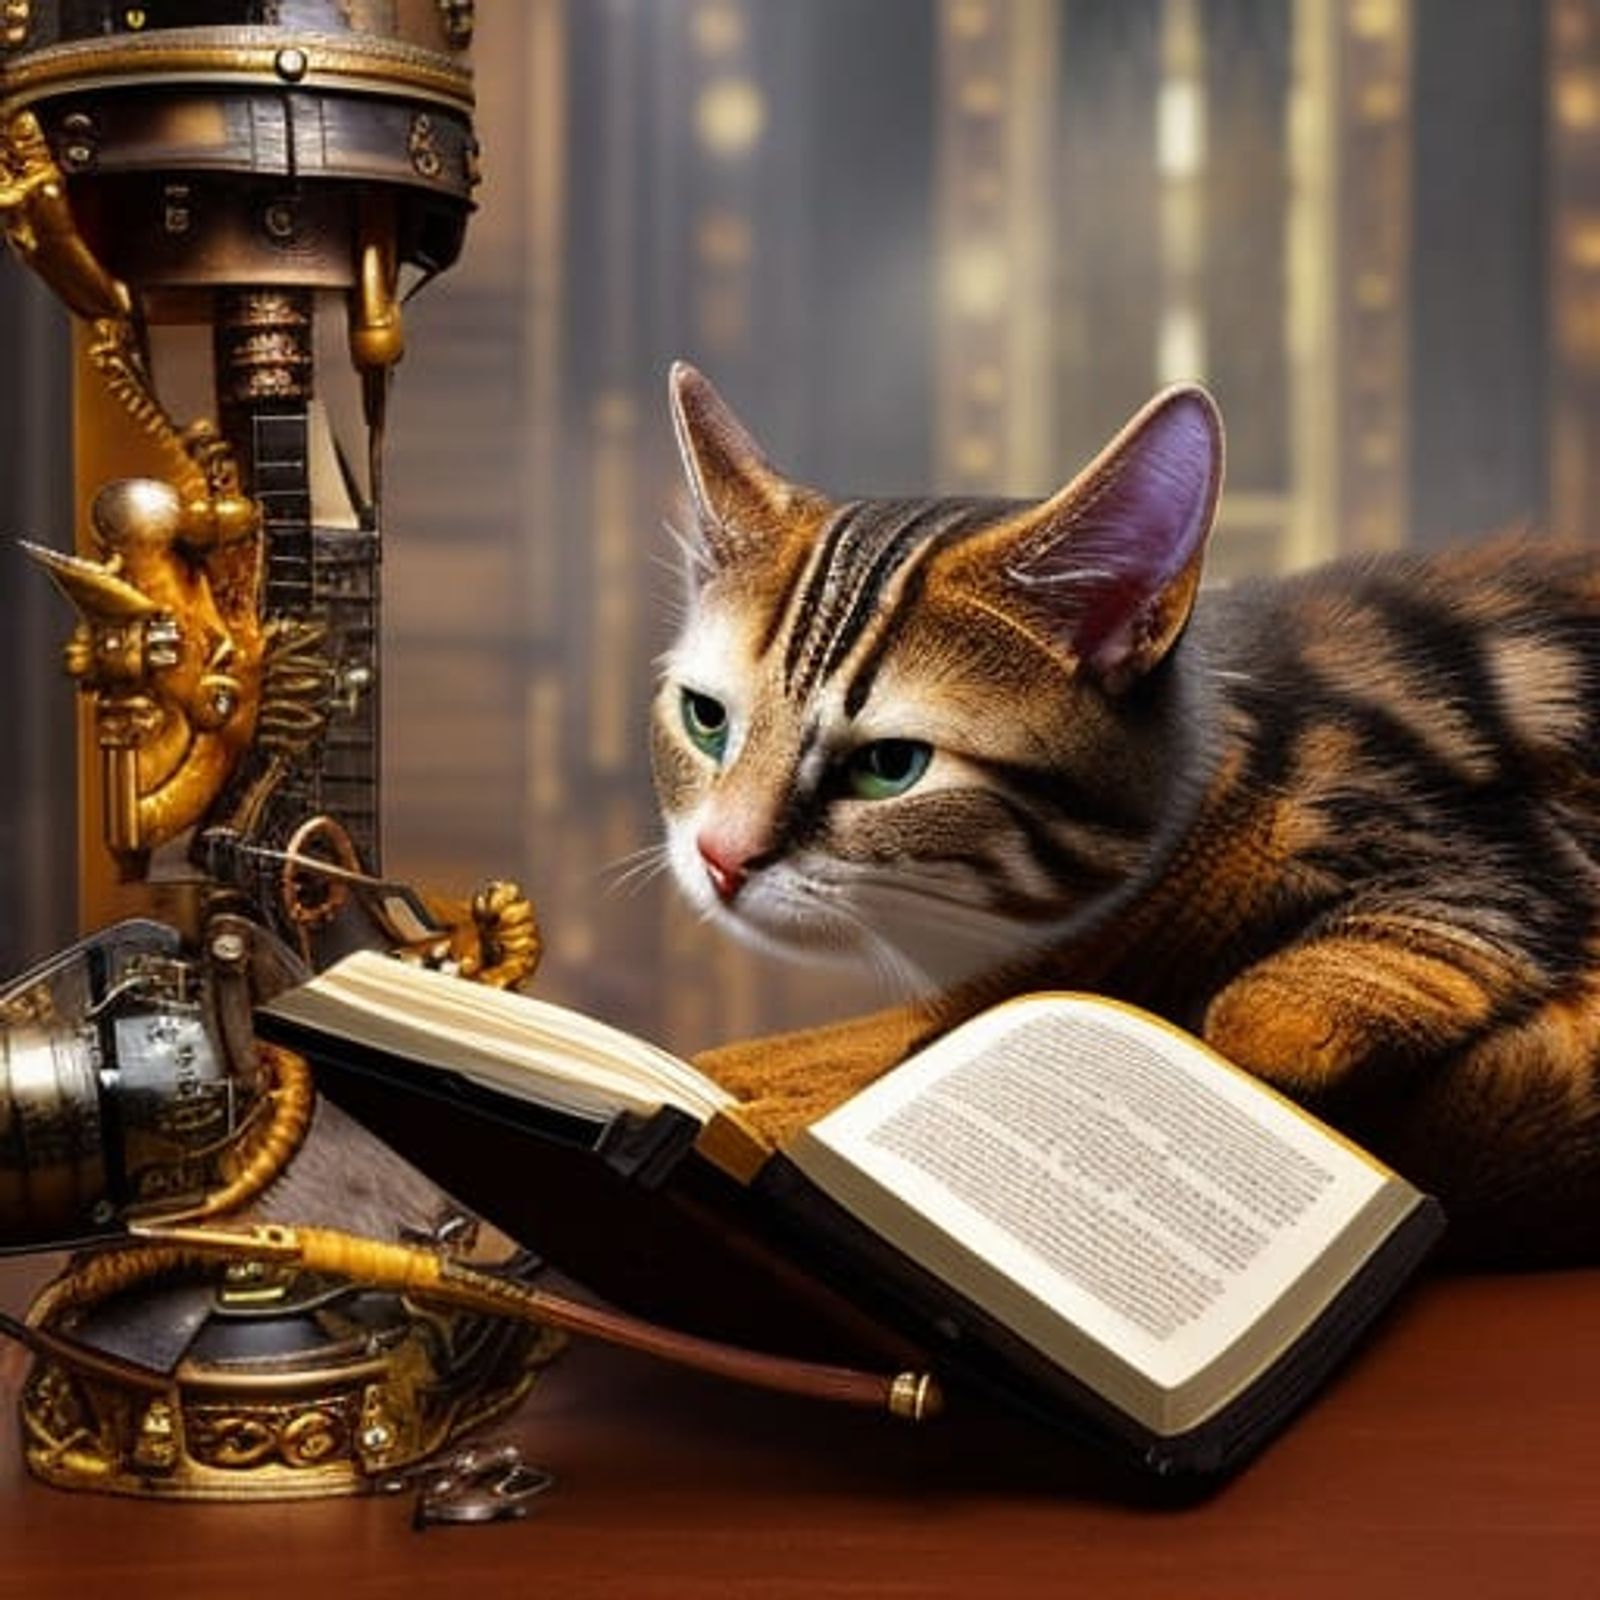 cats reading books